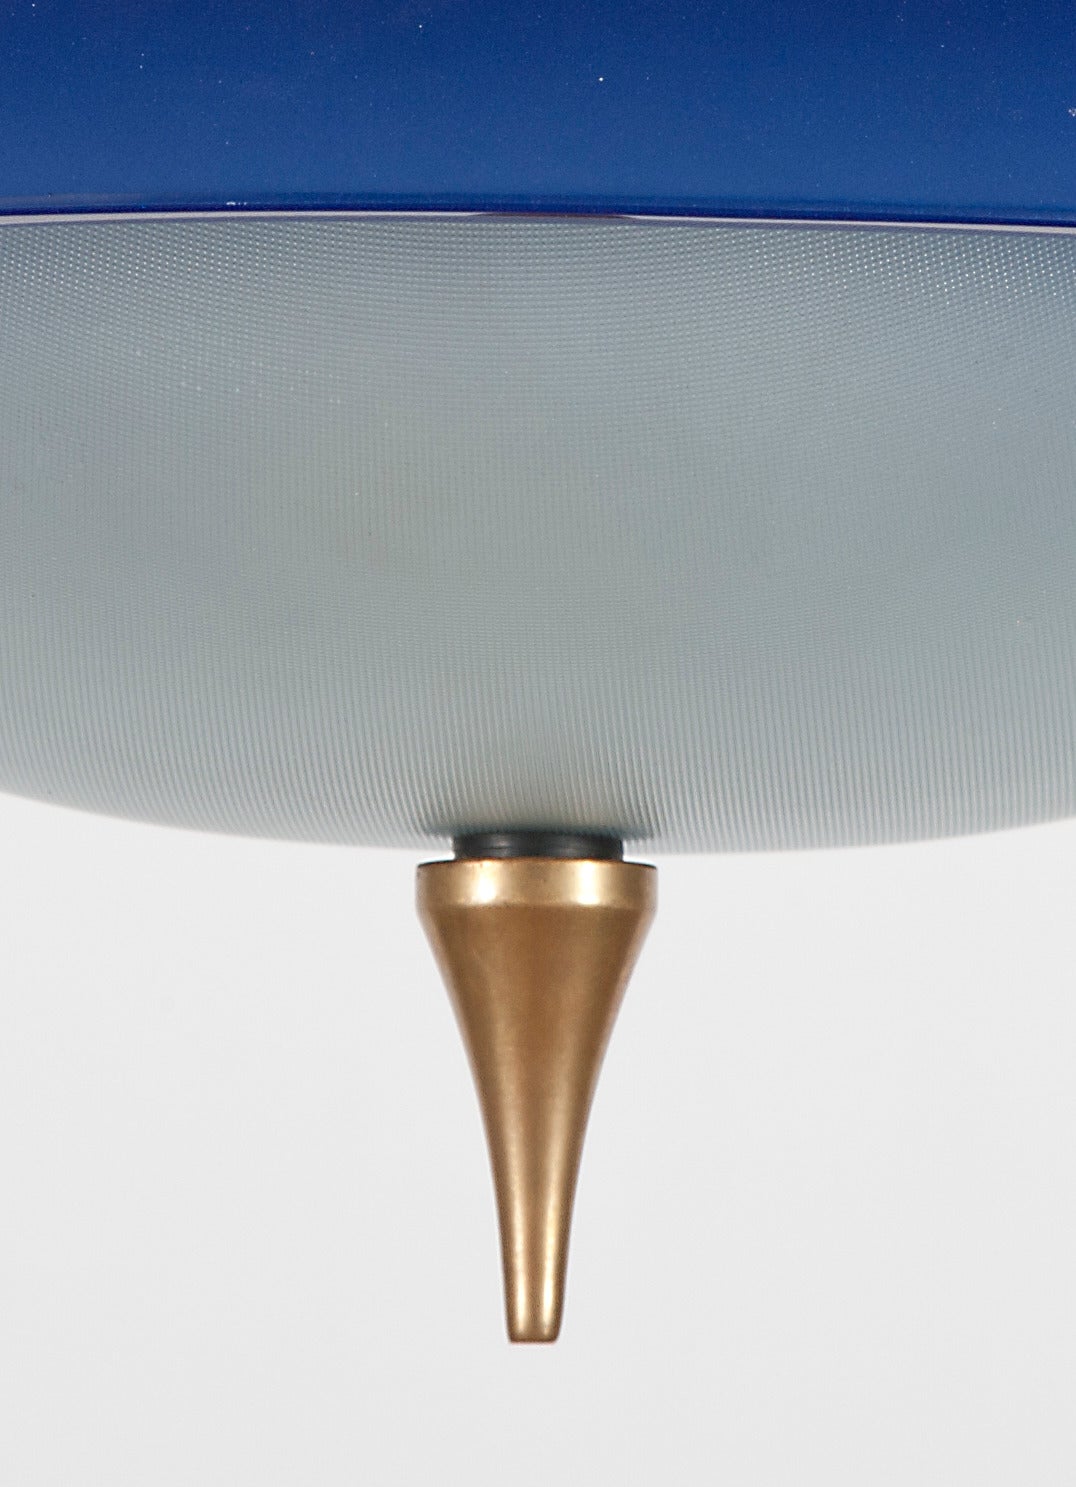 1950s plafoniere with two curved glass elements, white metal structure, brass finial.